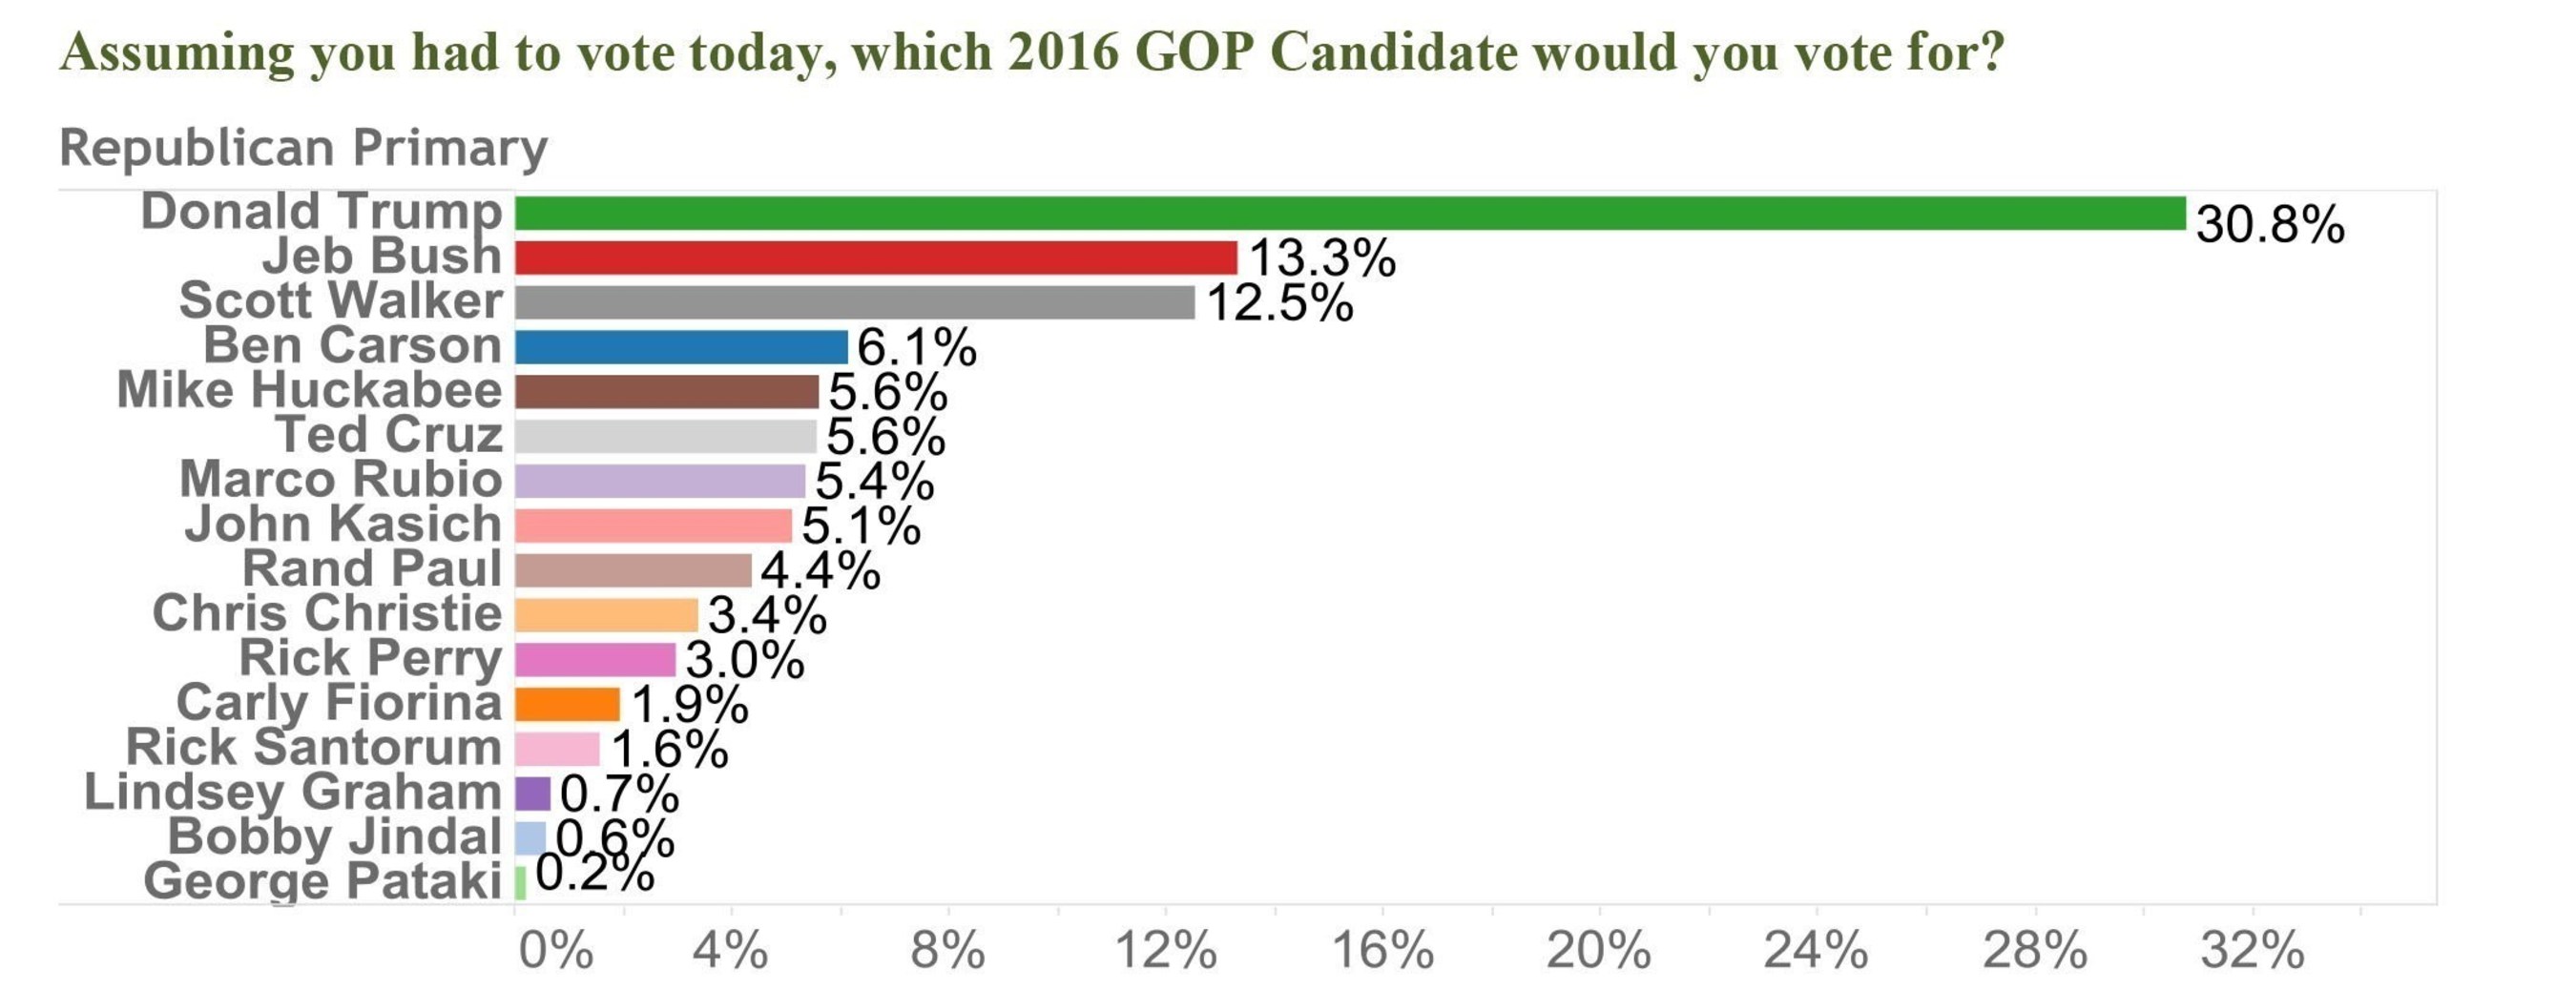 Assuming you had to vote today, which 2016 GOP Candidate would you vote for?